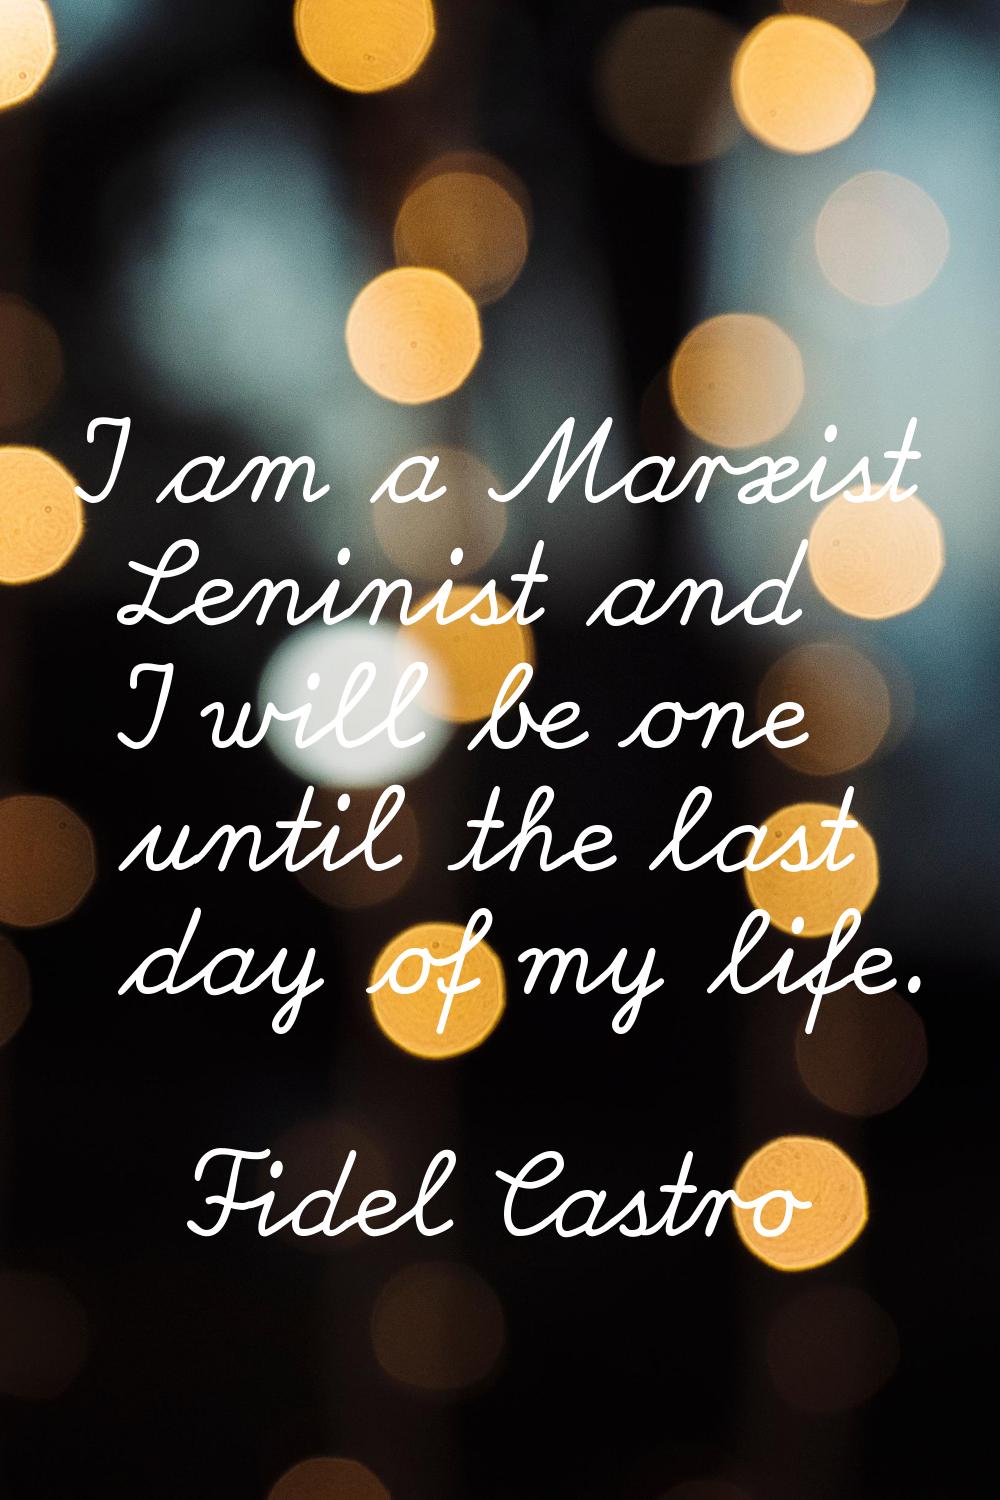 I am a Marxist Leninist and I will be one until the last day of my life.